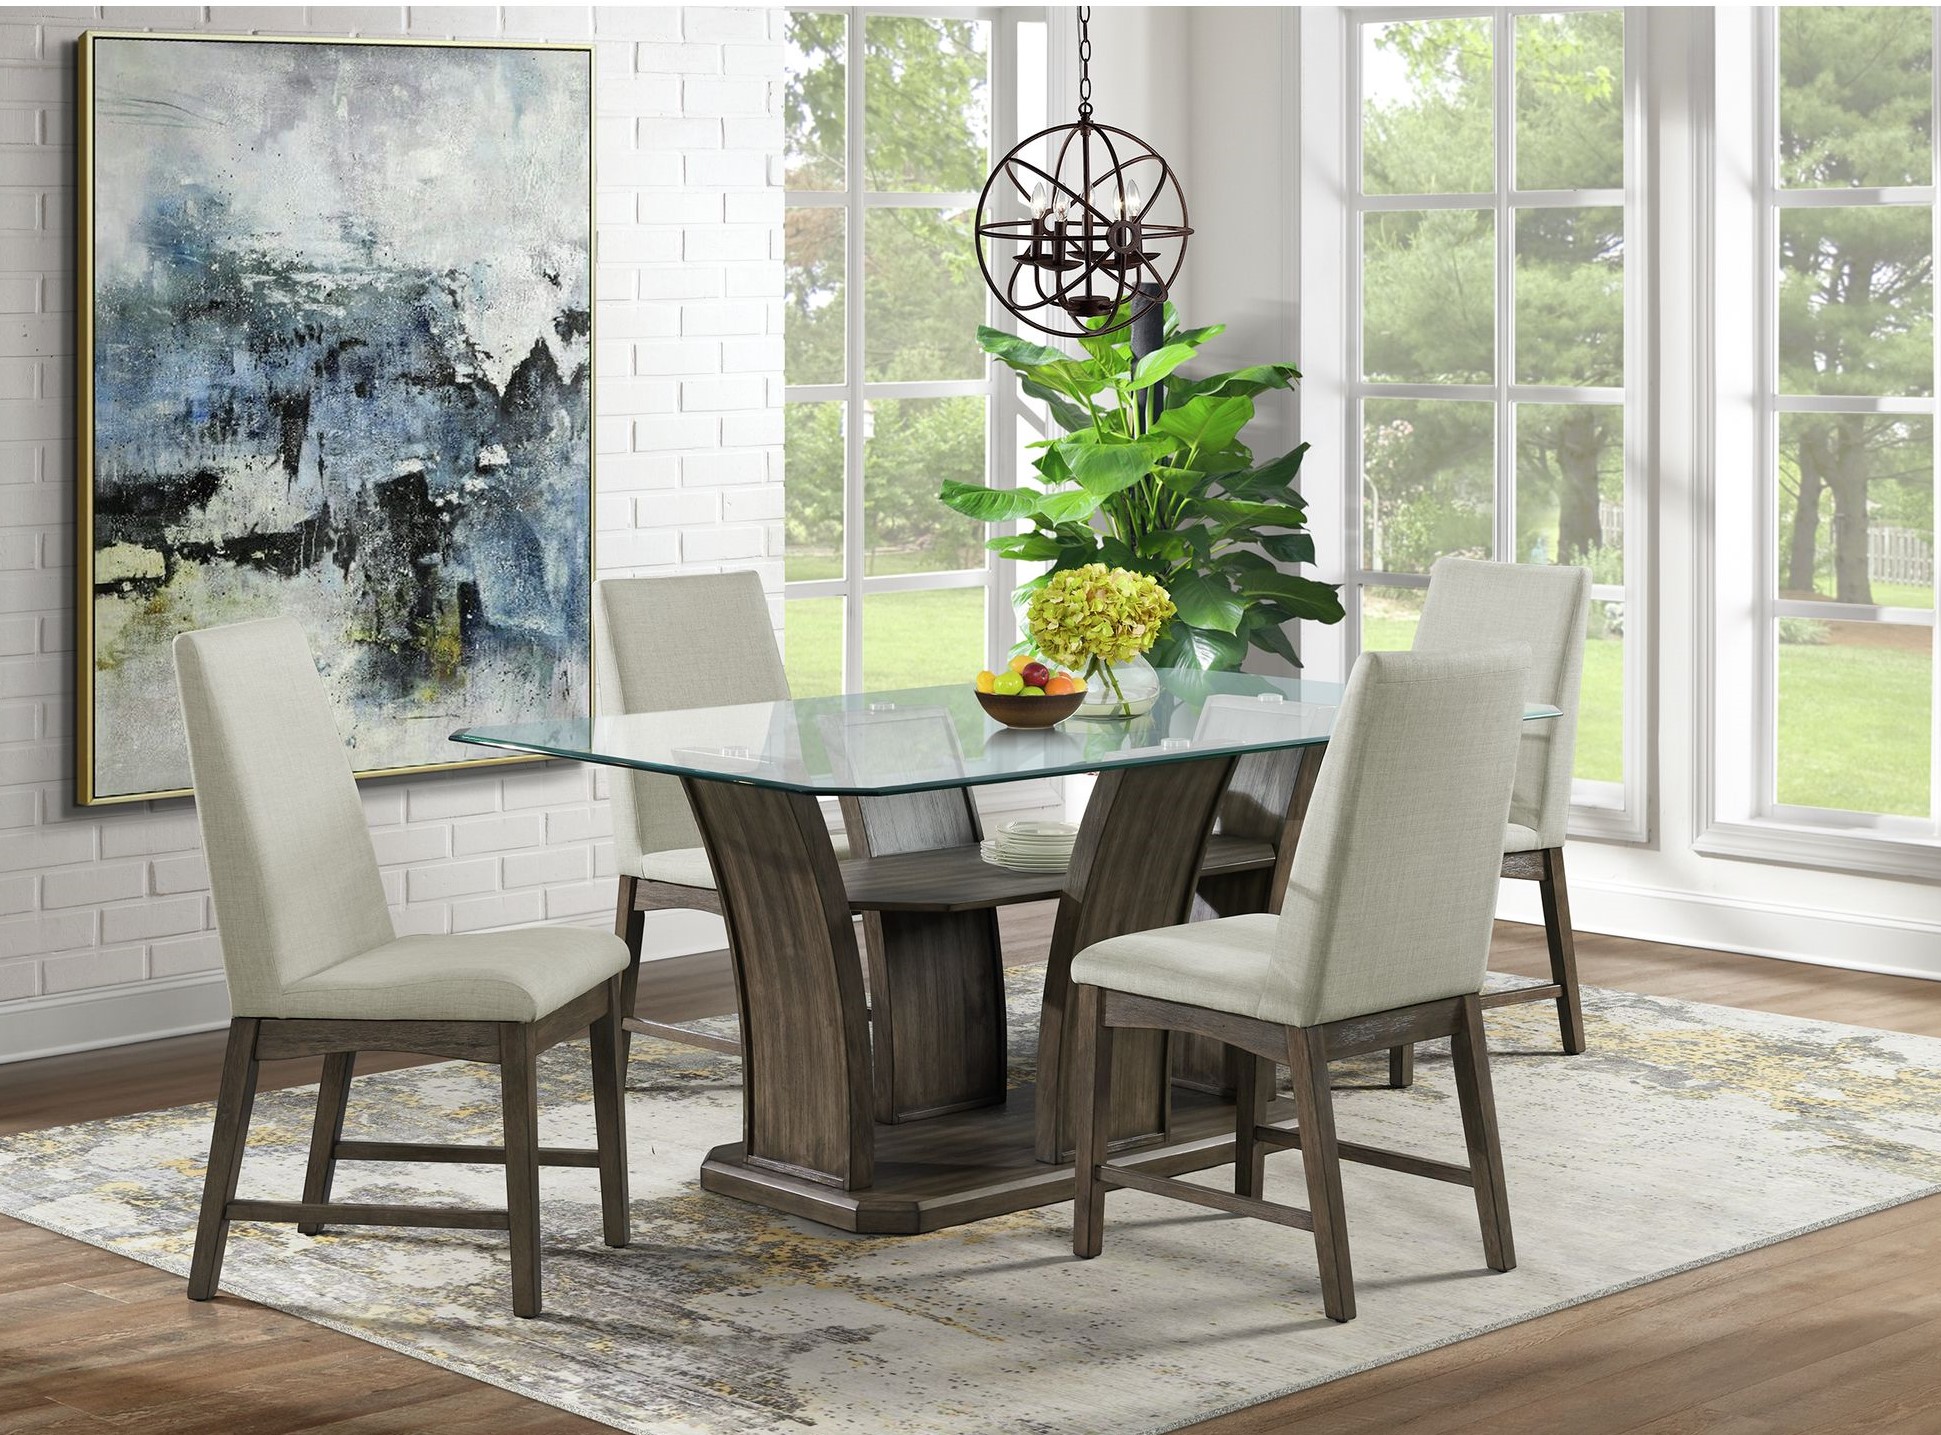 Elements International Dapper Grey/Glass Dining Table With 4 Chairs Set